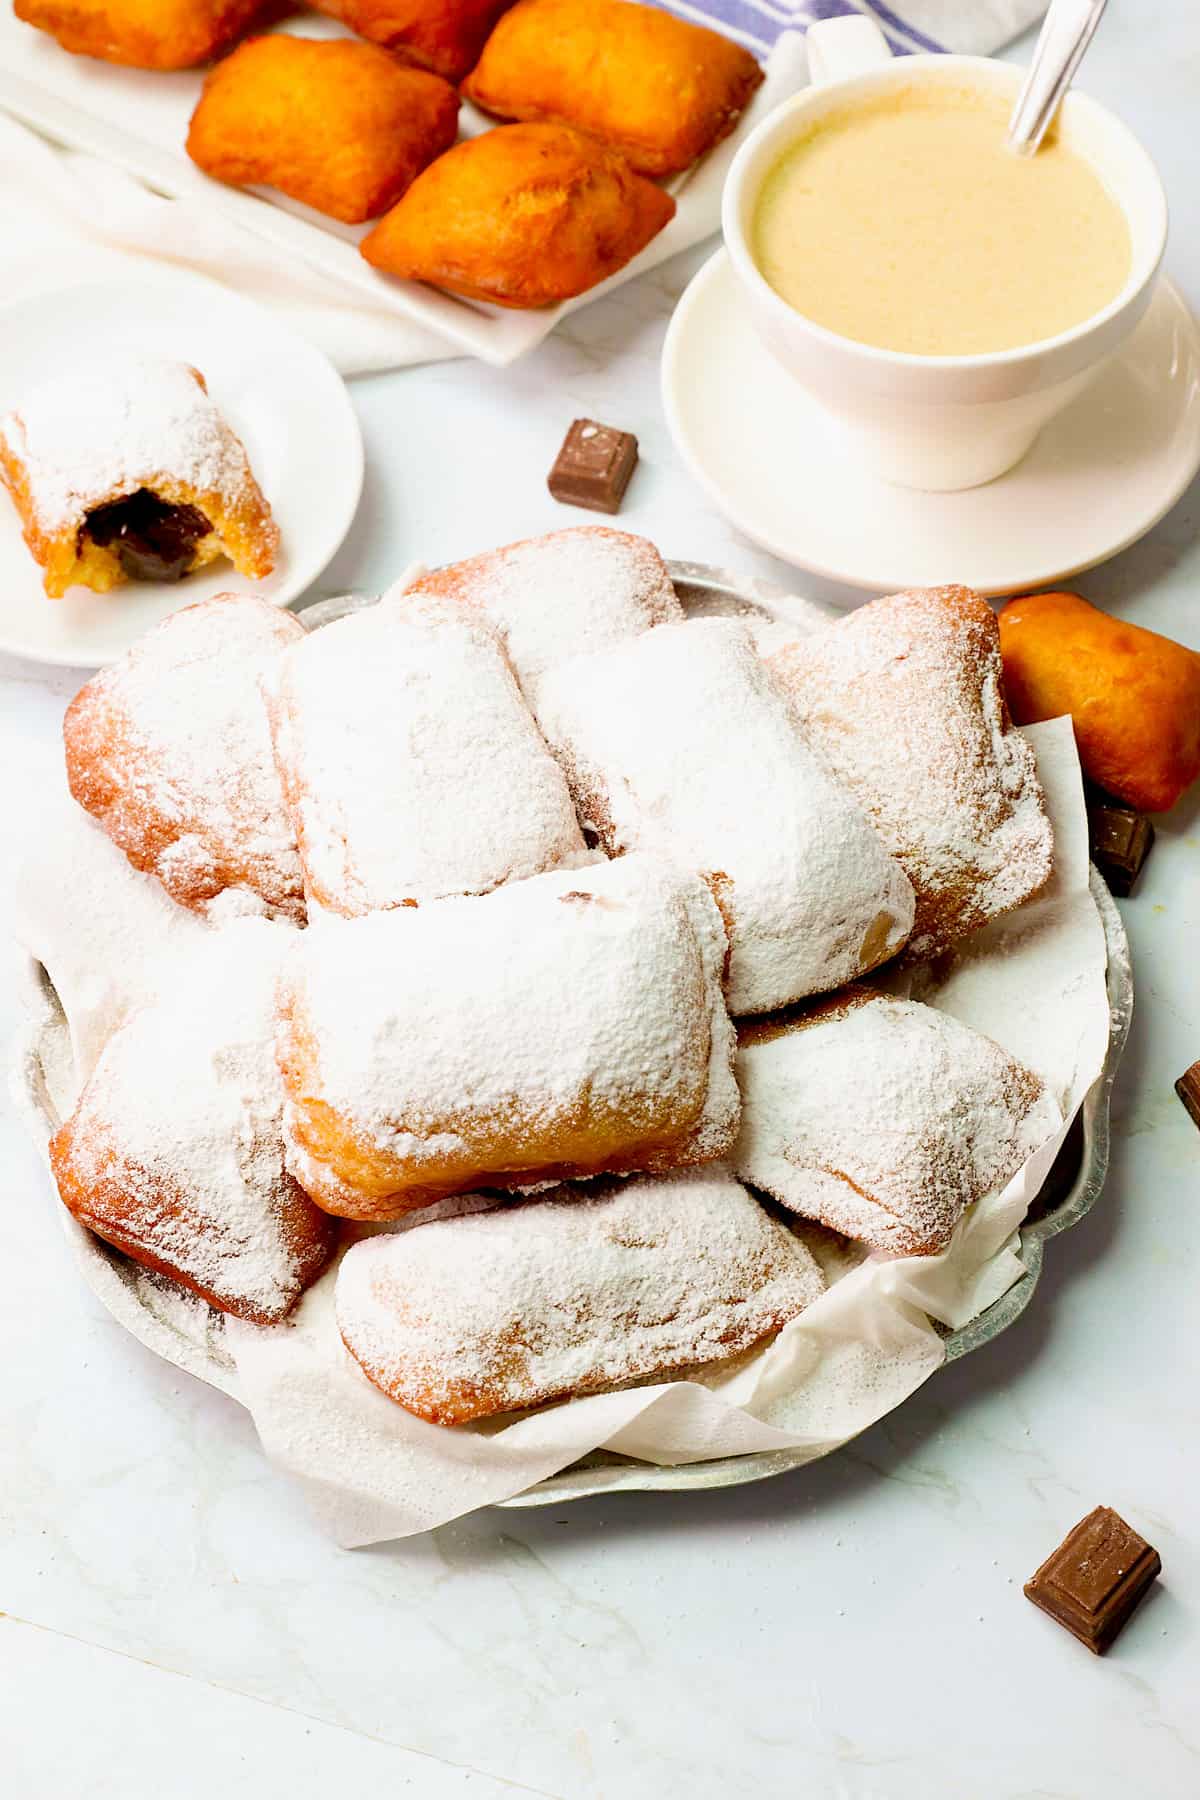 Insanely delicious Chocolate Beignets paired with a steaming cup of cafe au late